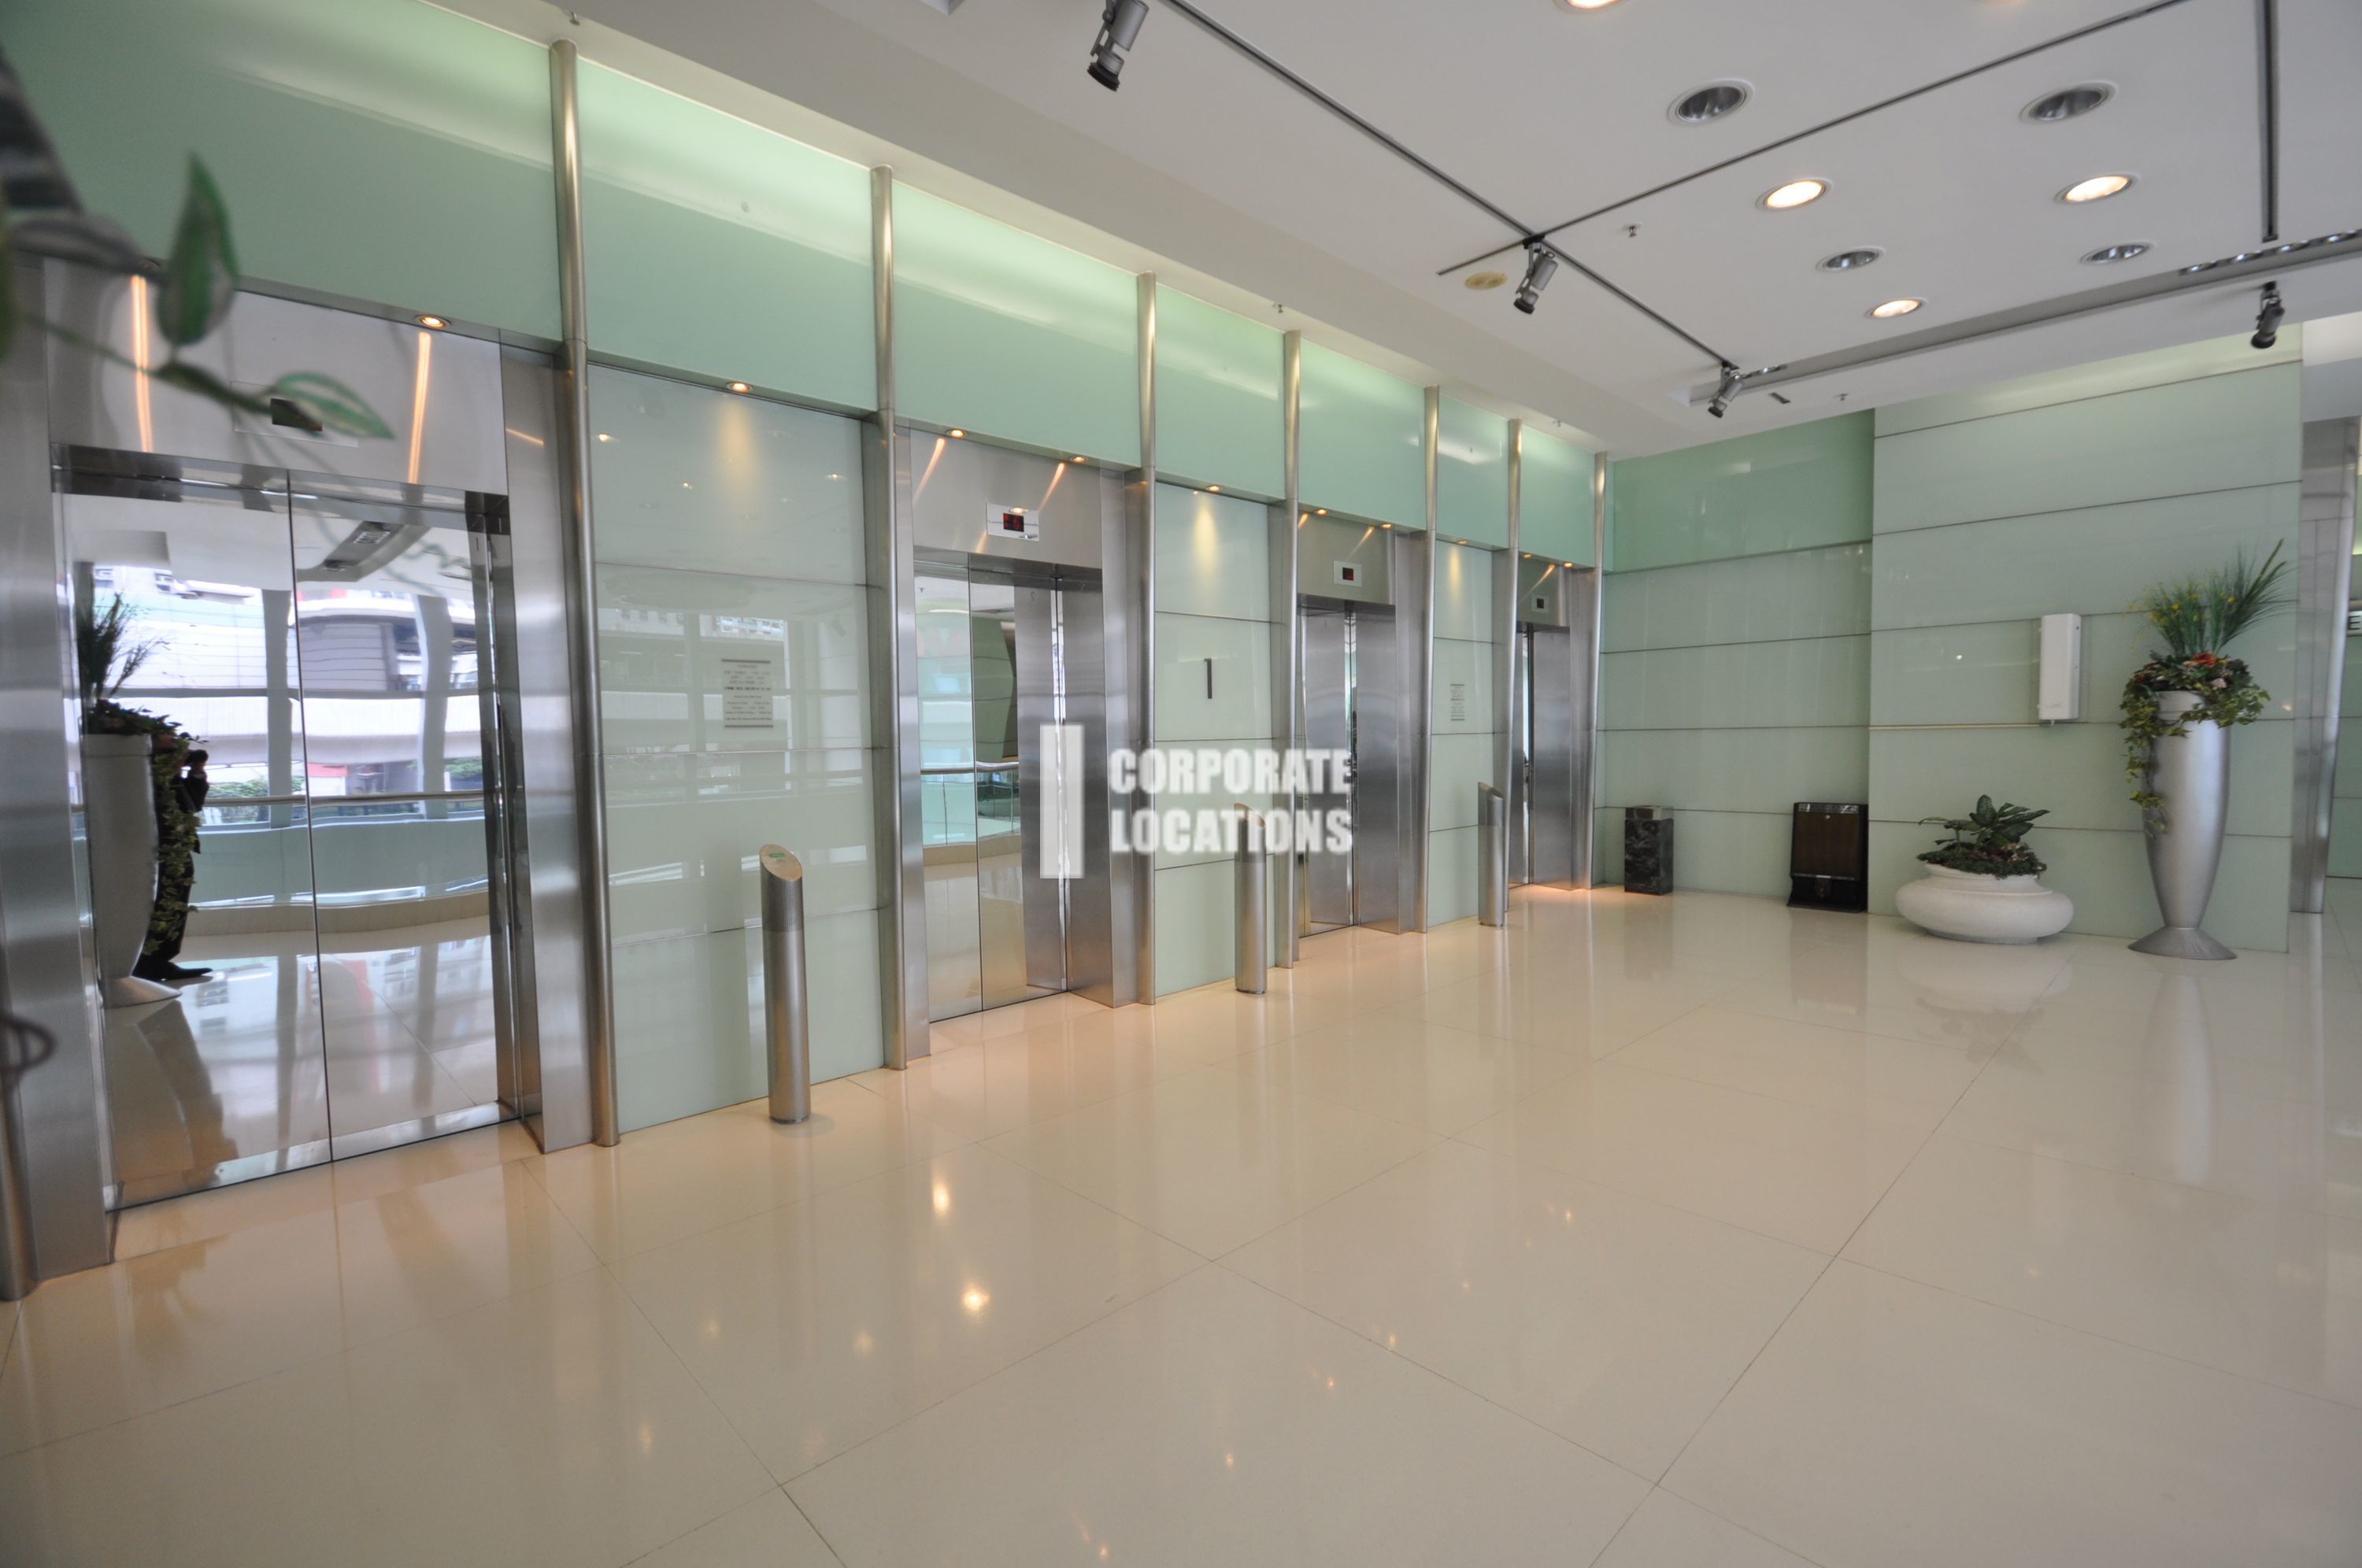 Lease offices in Millennium City 3 - Kowloon Bay / Kwun Tong